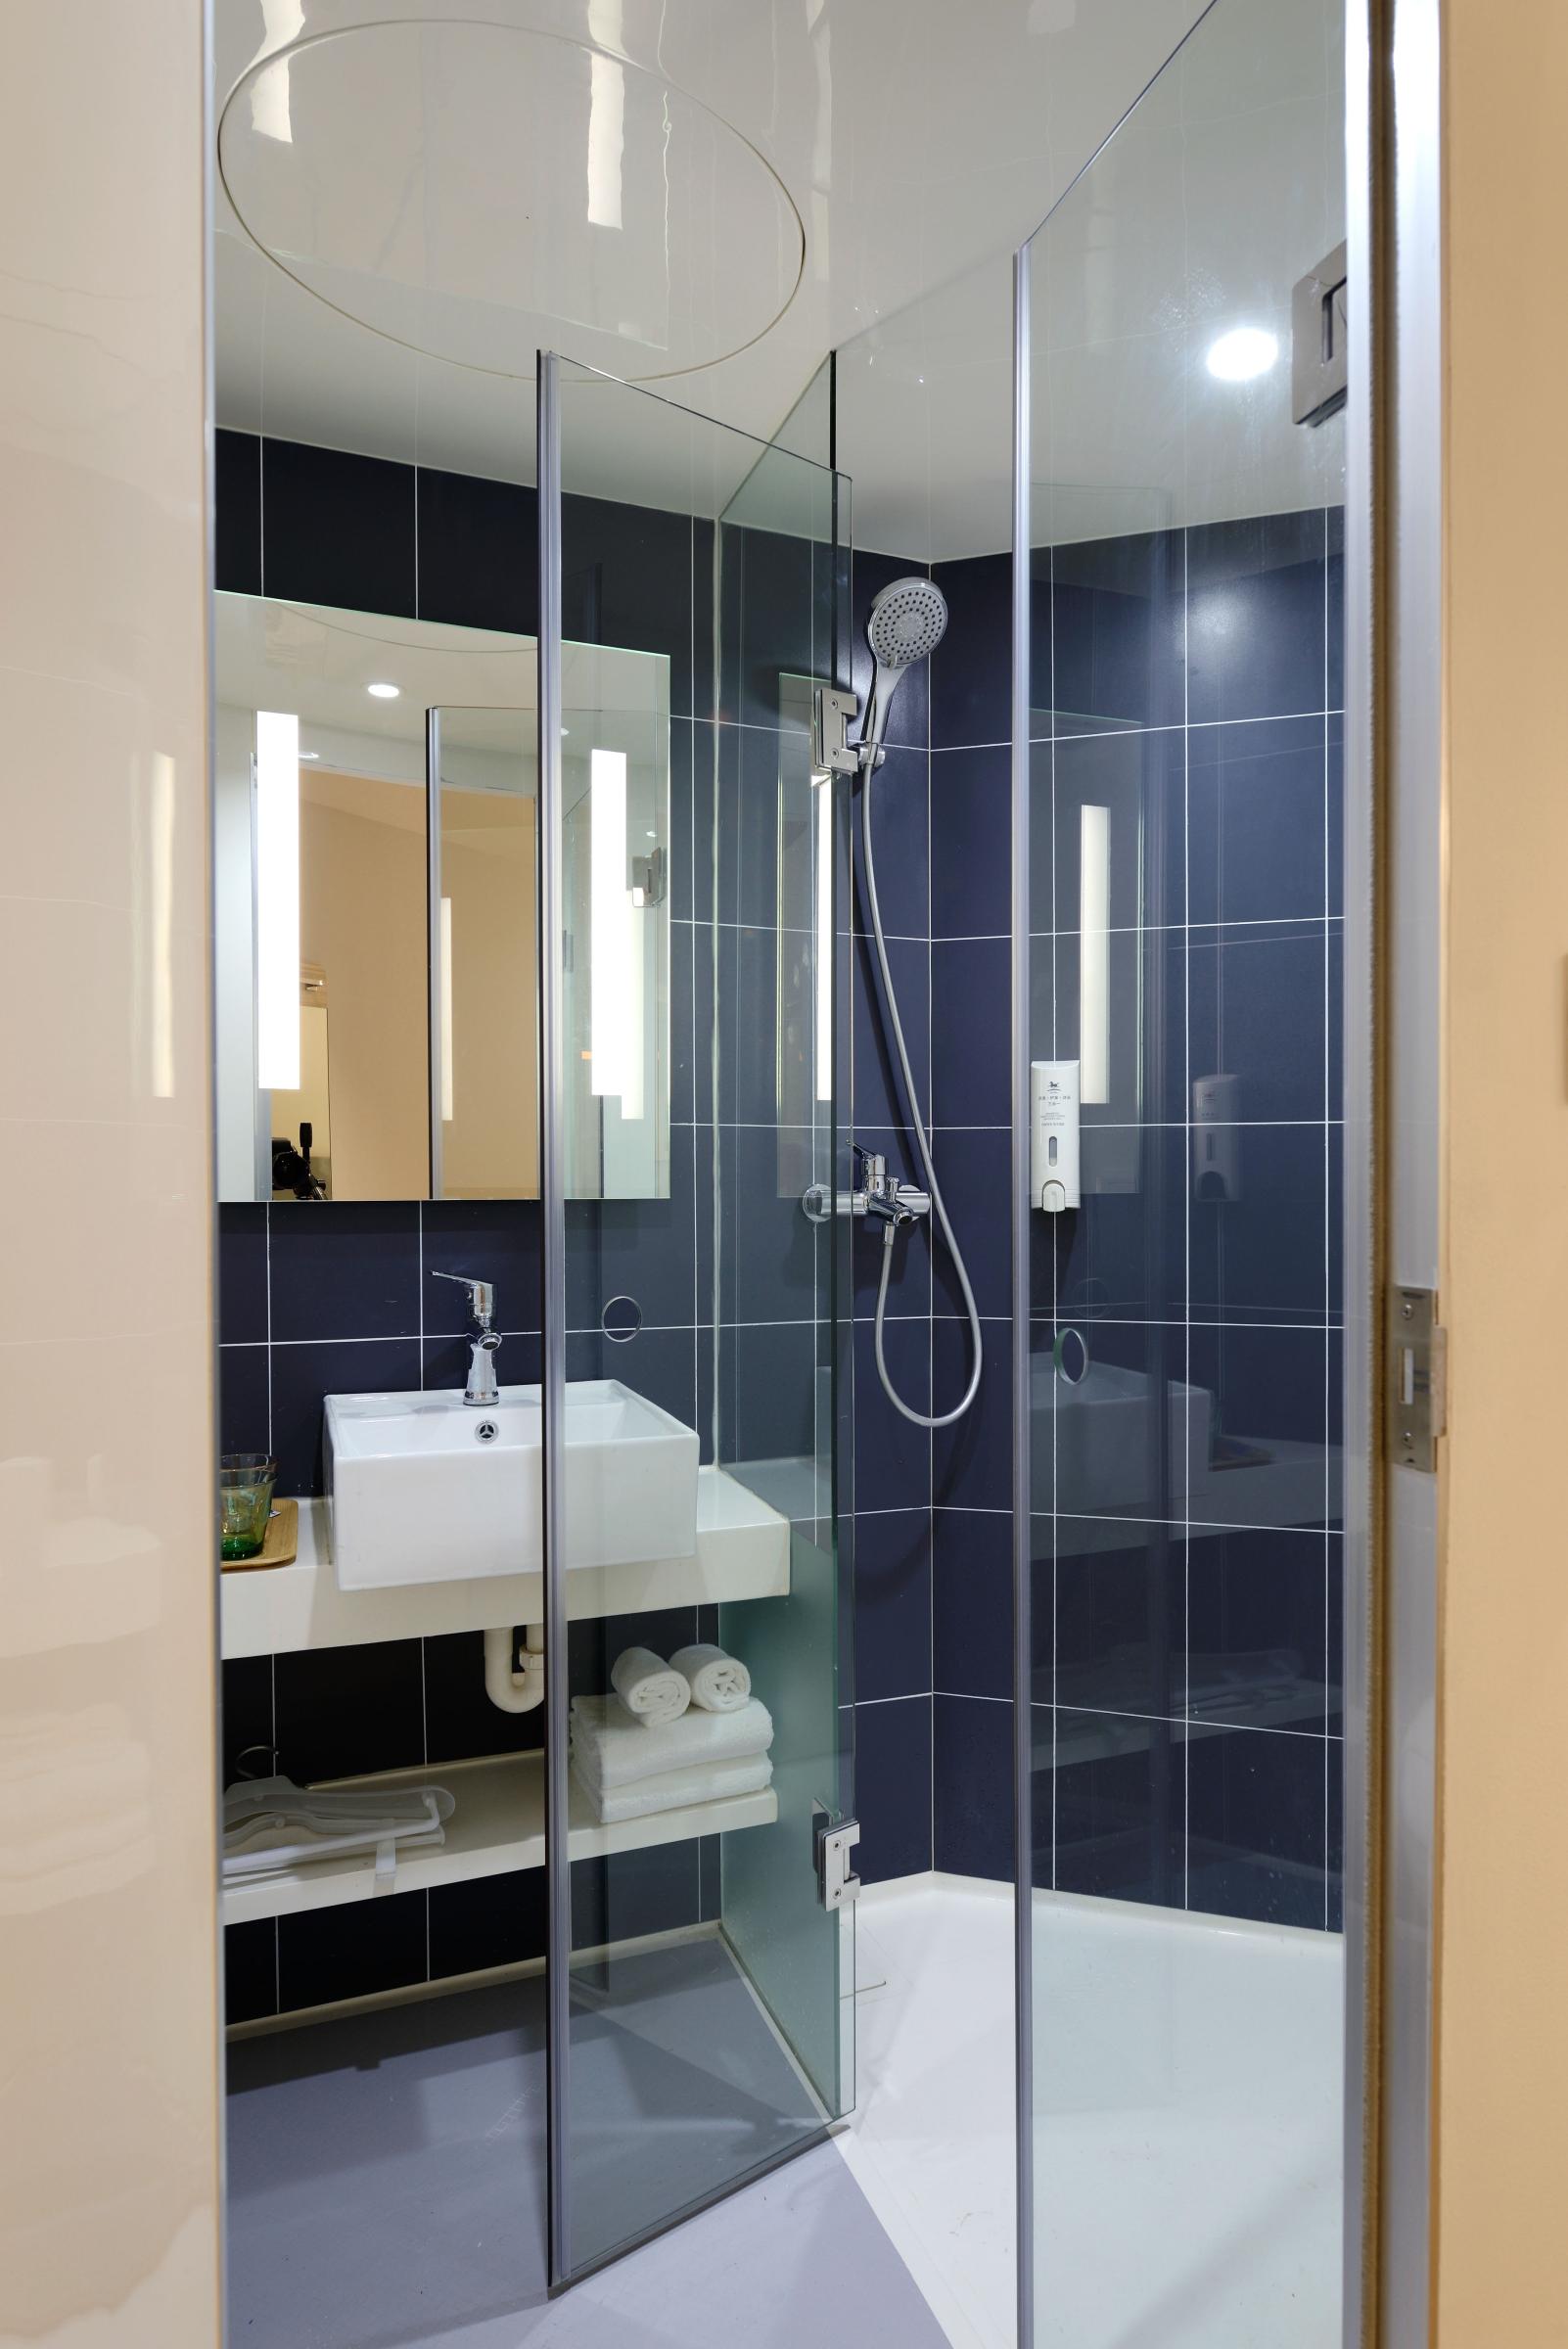 Glenview Home Cleaning. How To Deep Clean Bathrooms